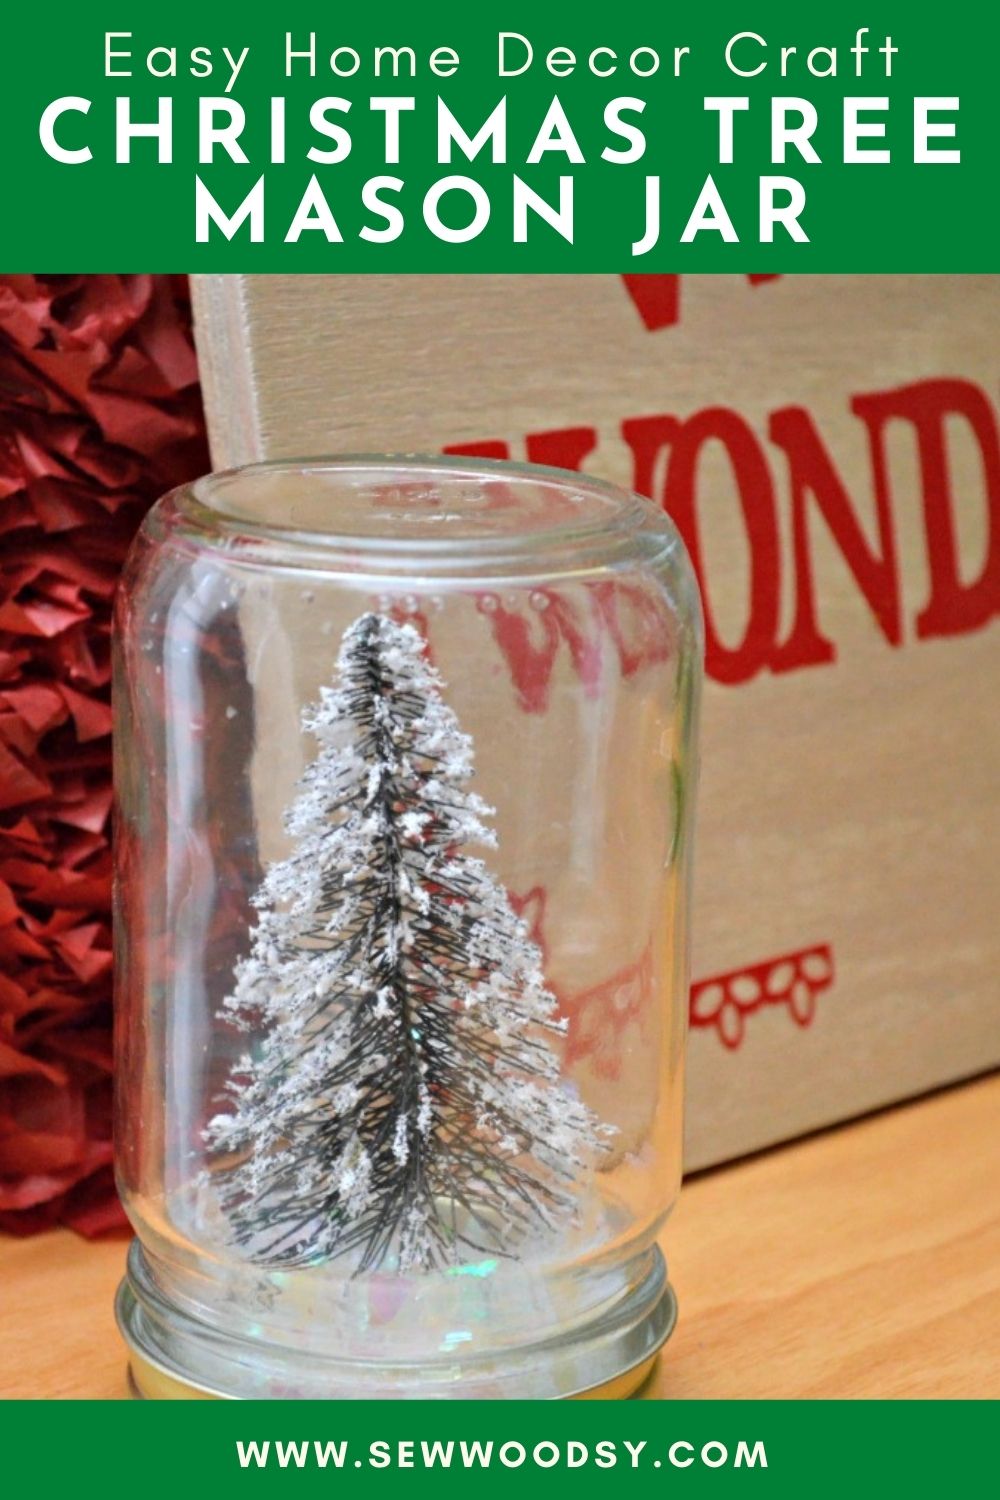 Close up of a wire bottle brush tree in a mason jar with text on image for Pinterest.